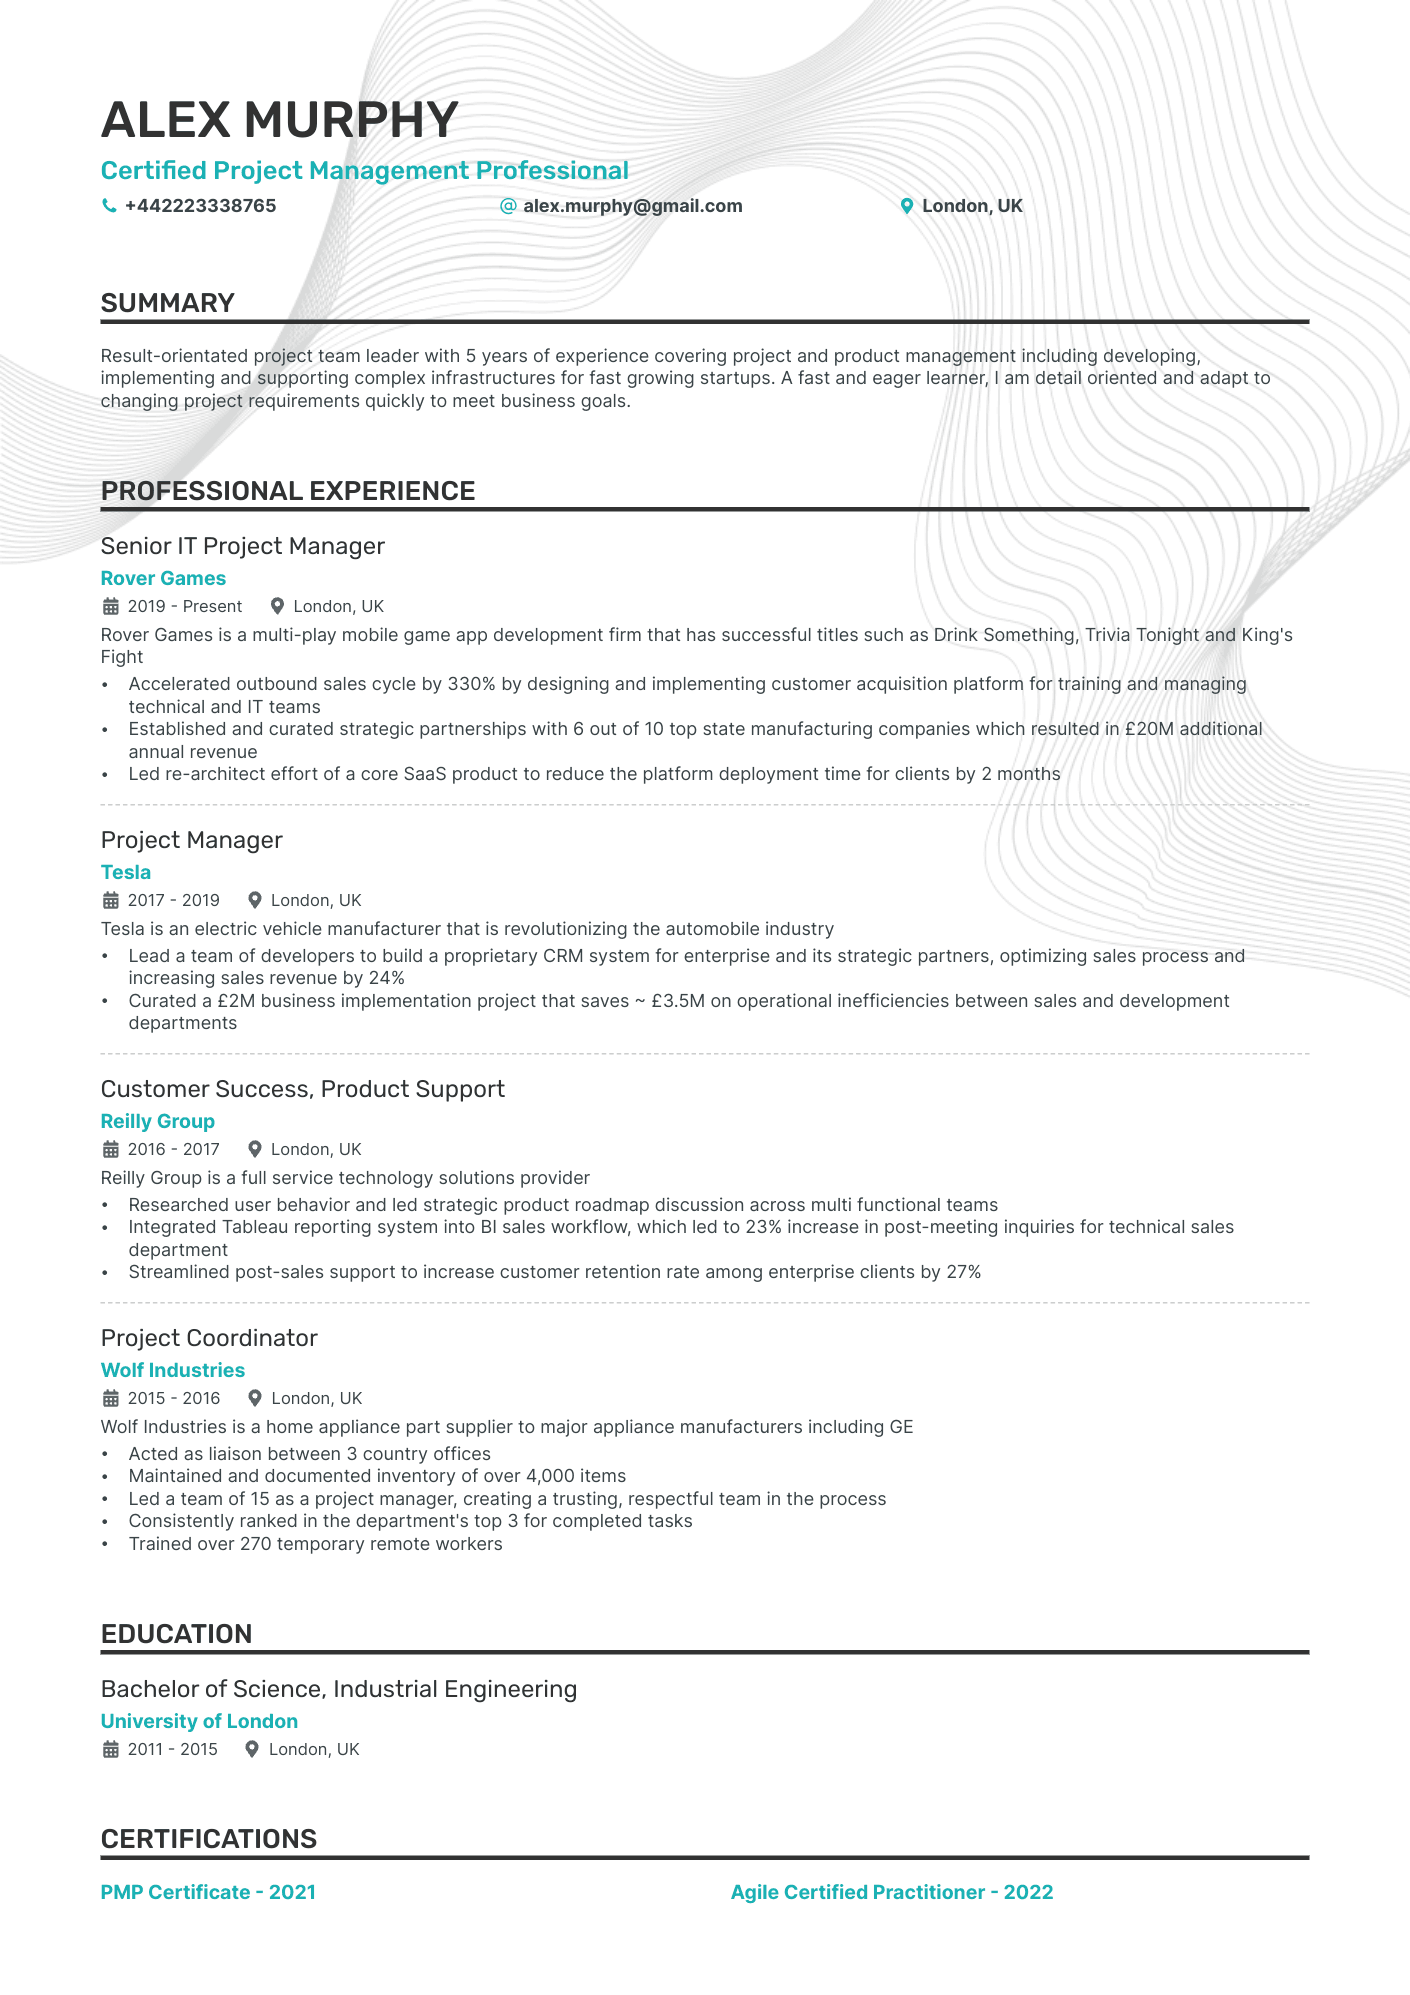 Certified Project Management Professional CV example